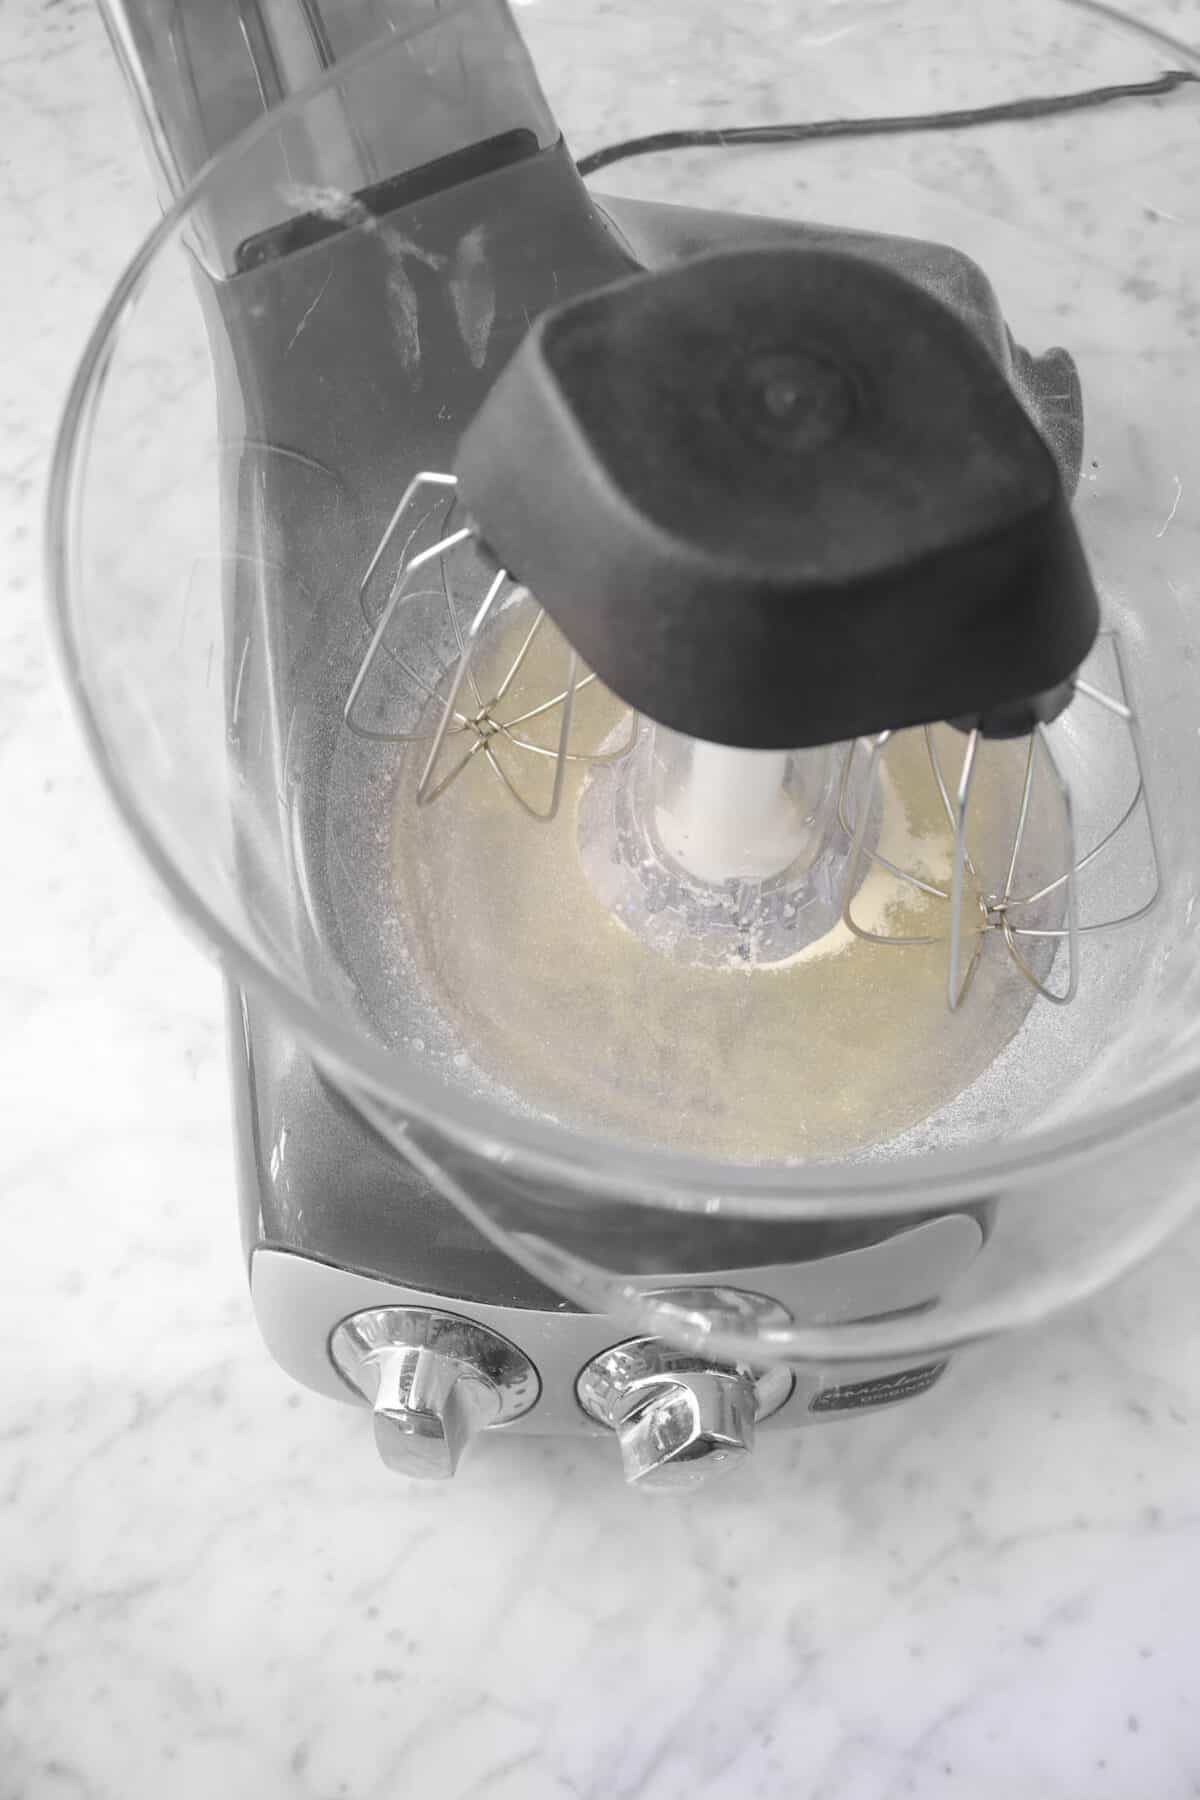 water and gelatin in a mixer